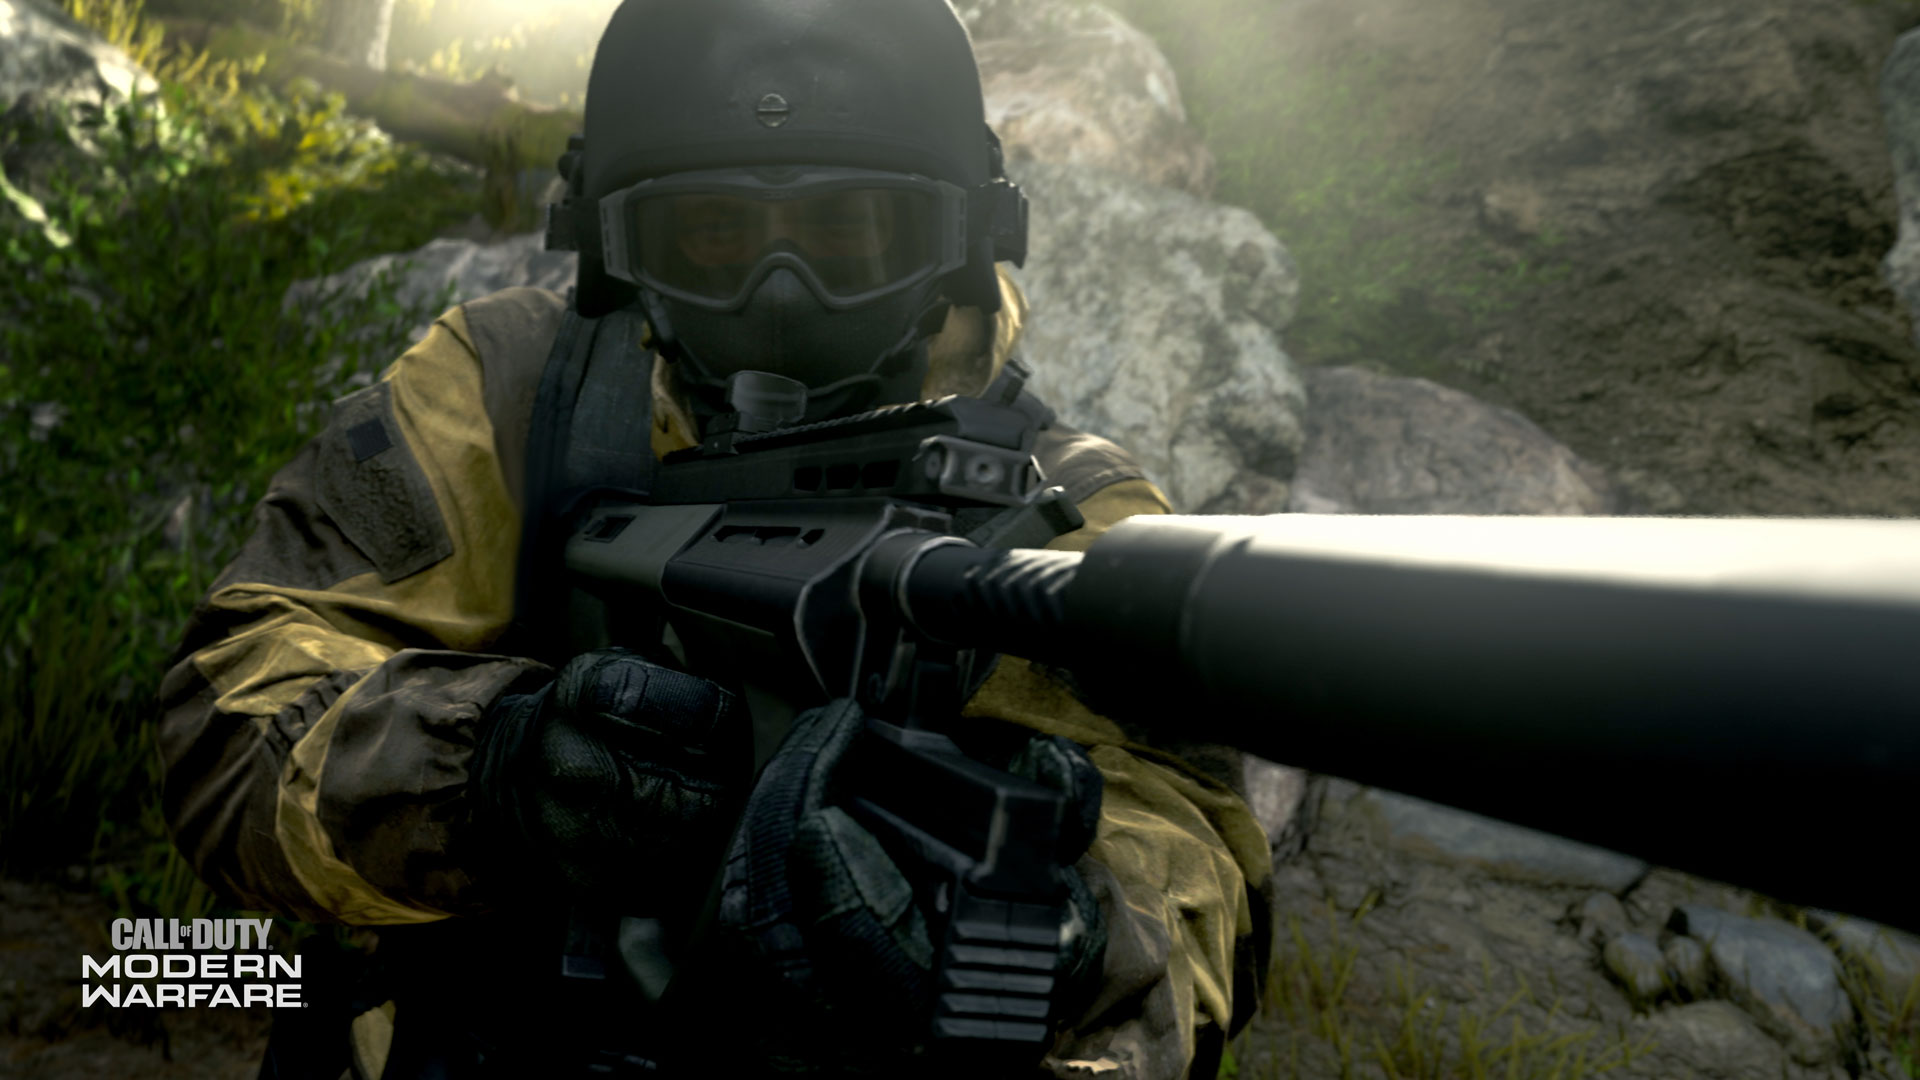 General 1920x1080 Call of Duty: Modern Warfare army video games Steyr Steyr AUG  Austrian firearms suppressors Activision